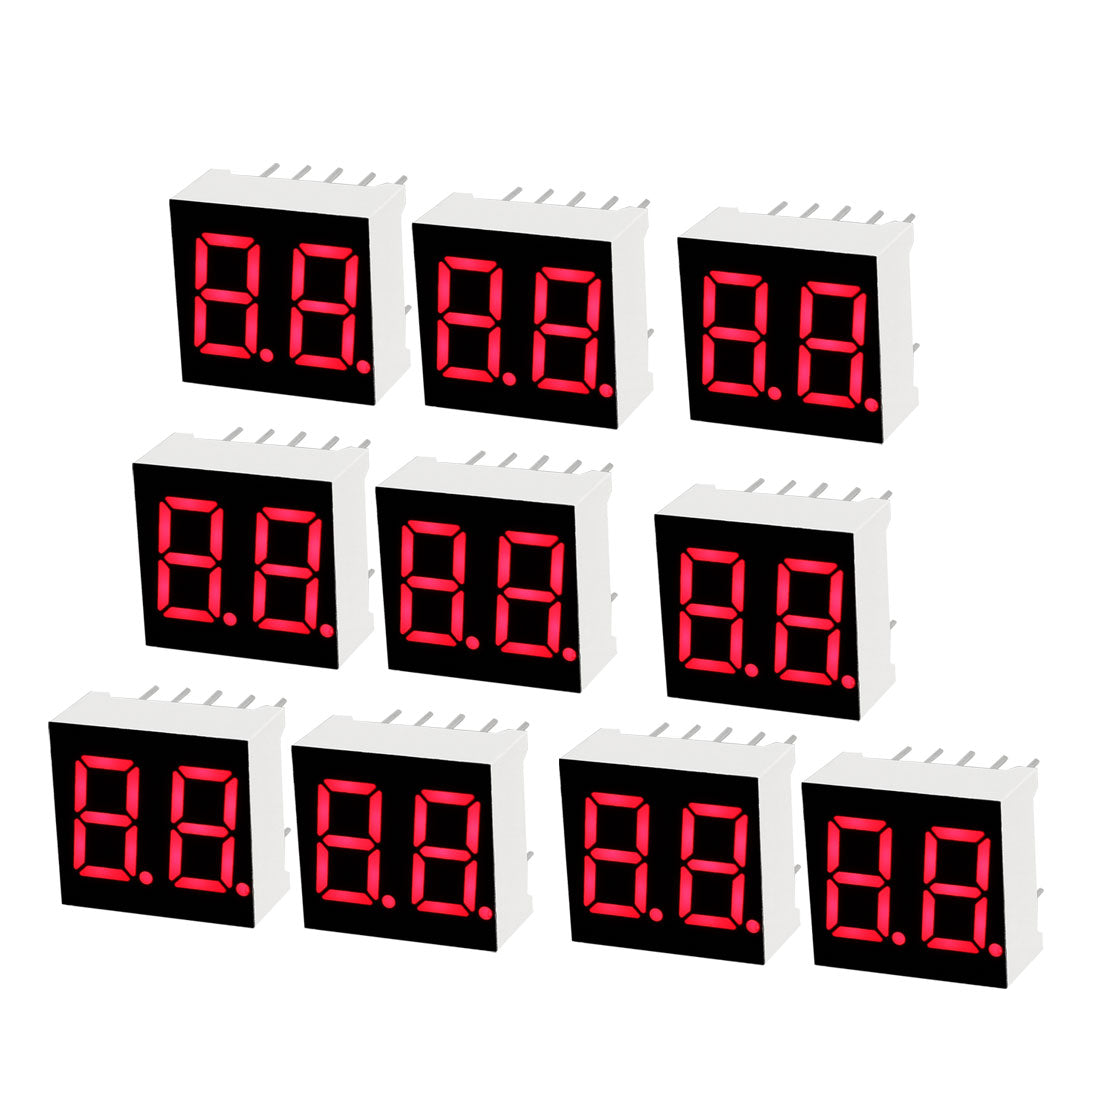 uxcell Uxcell Common Anode 10 Pin 2 Bit 7 Segment 0.59 x 0.55 x 0.28 Inch 0.35" Red LED Display Digital Tube 10pcs